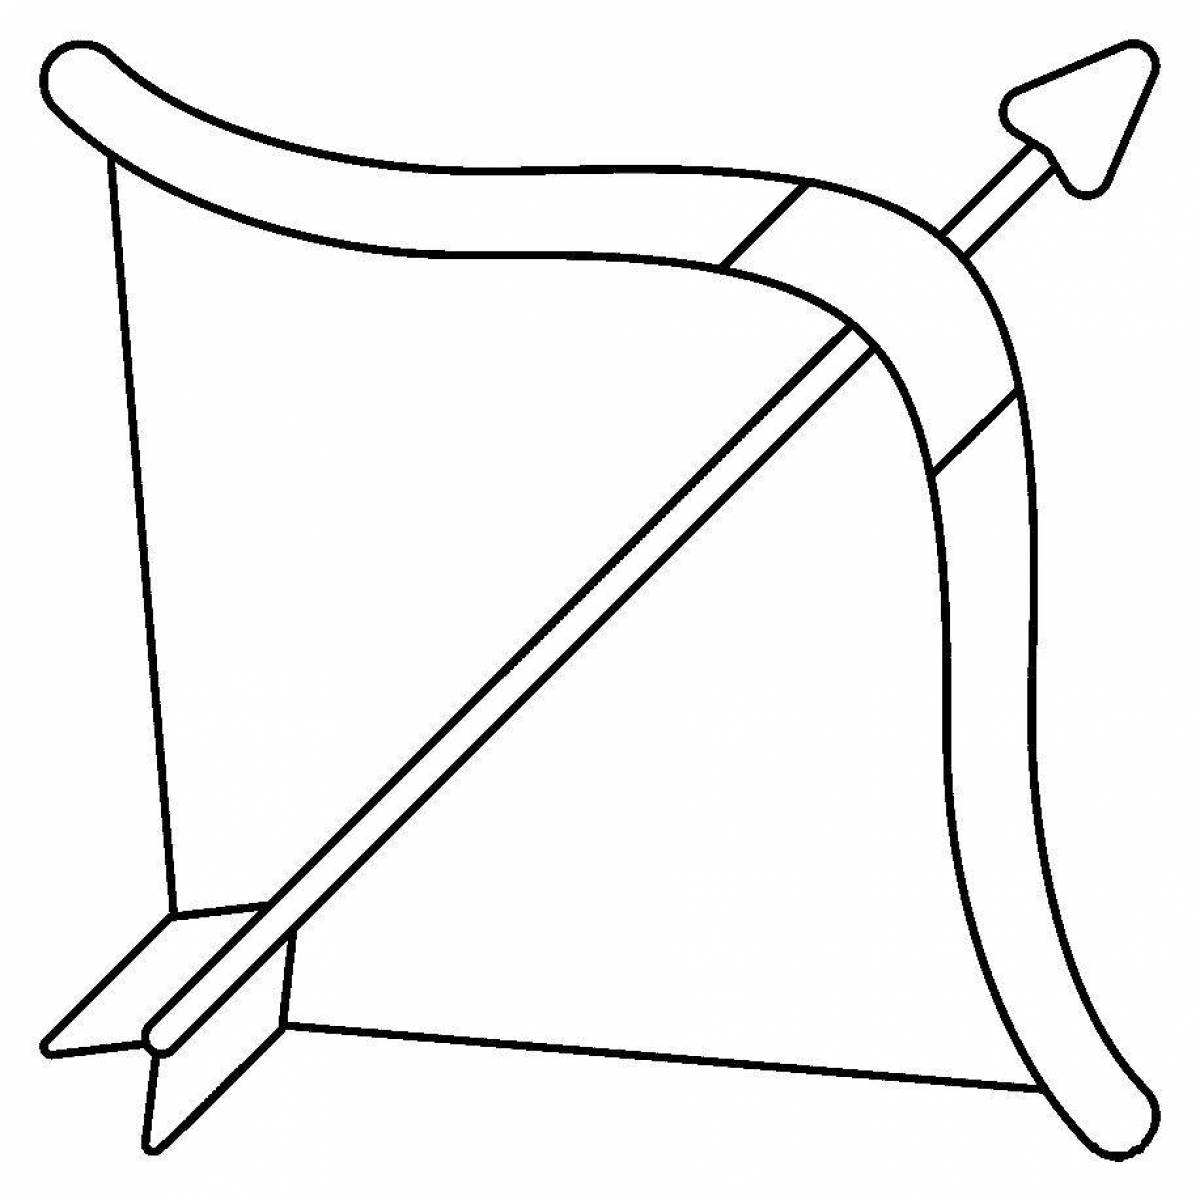 Colourful bow and arrow coloring page